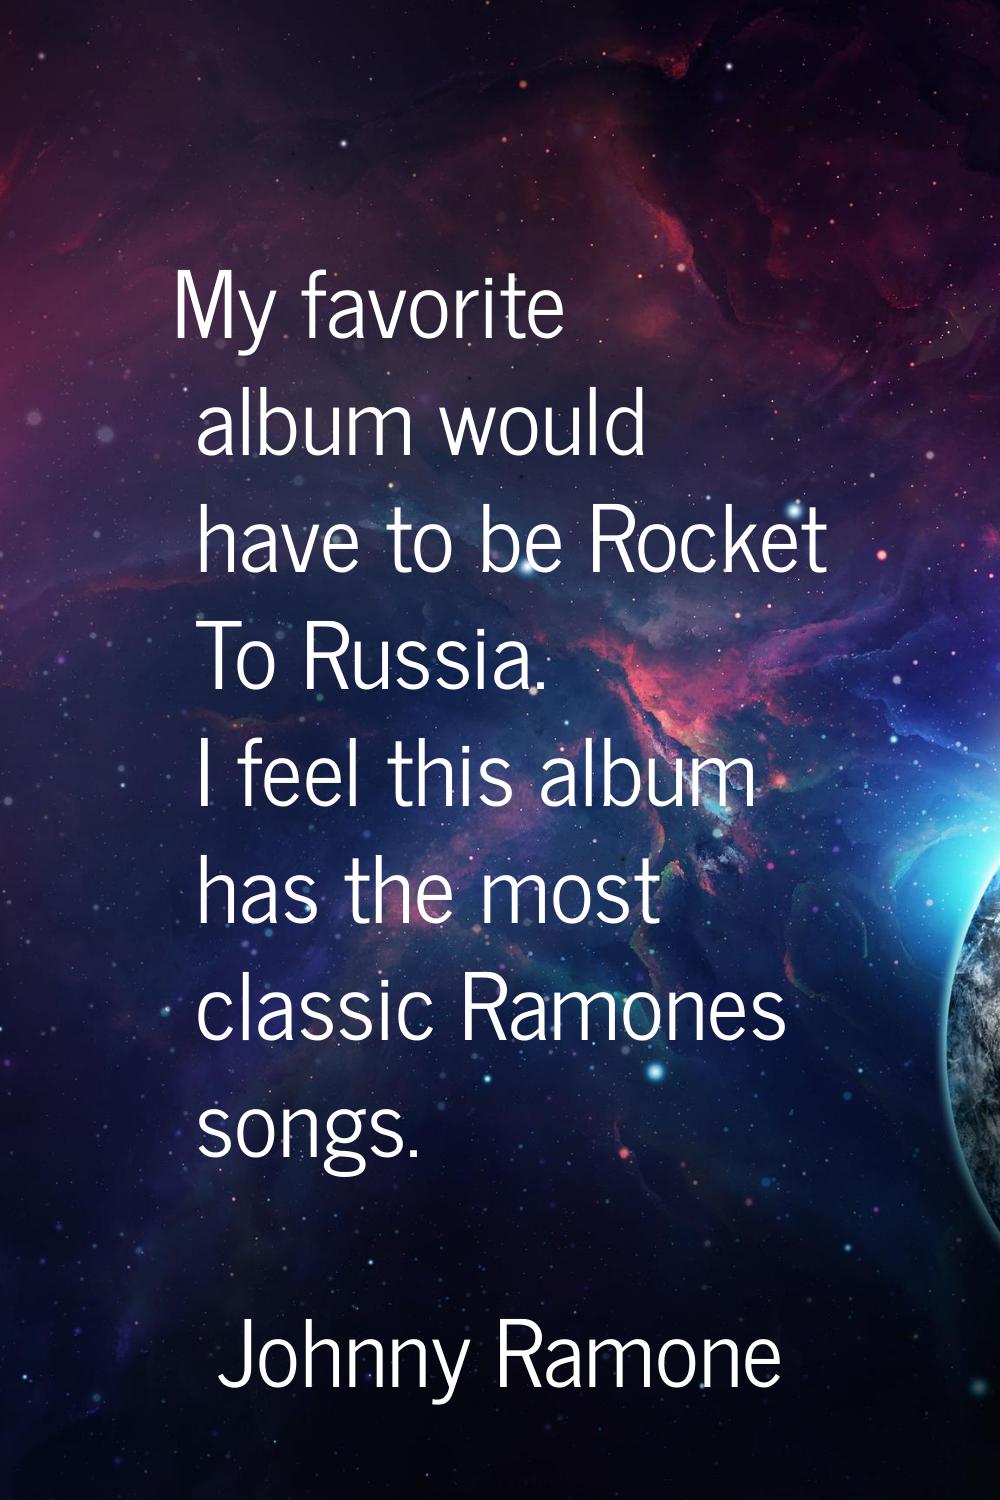 My favorite album would have to be Rocket To Russia. I feel this album has the most classic Ramones